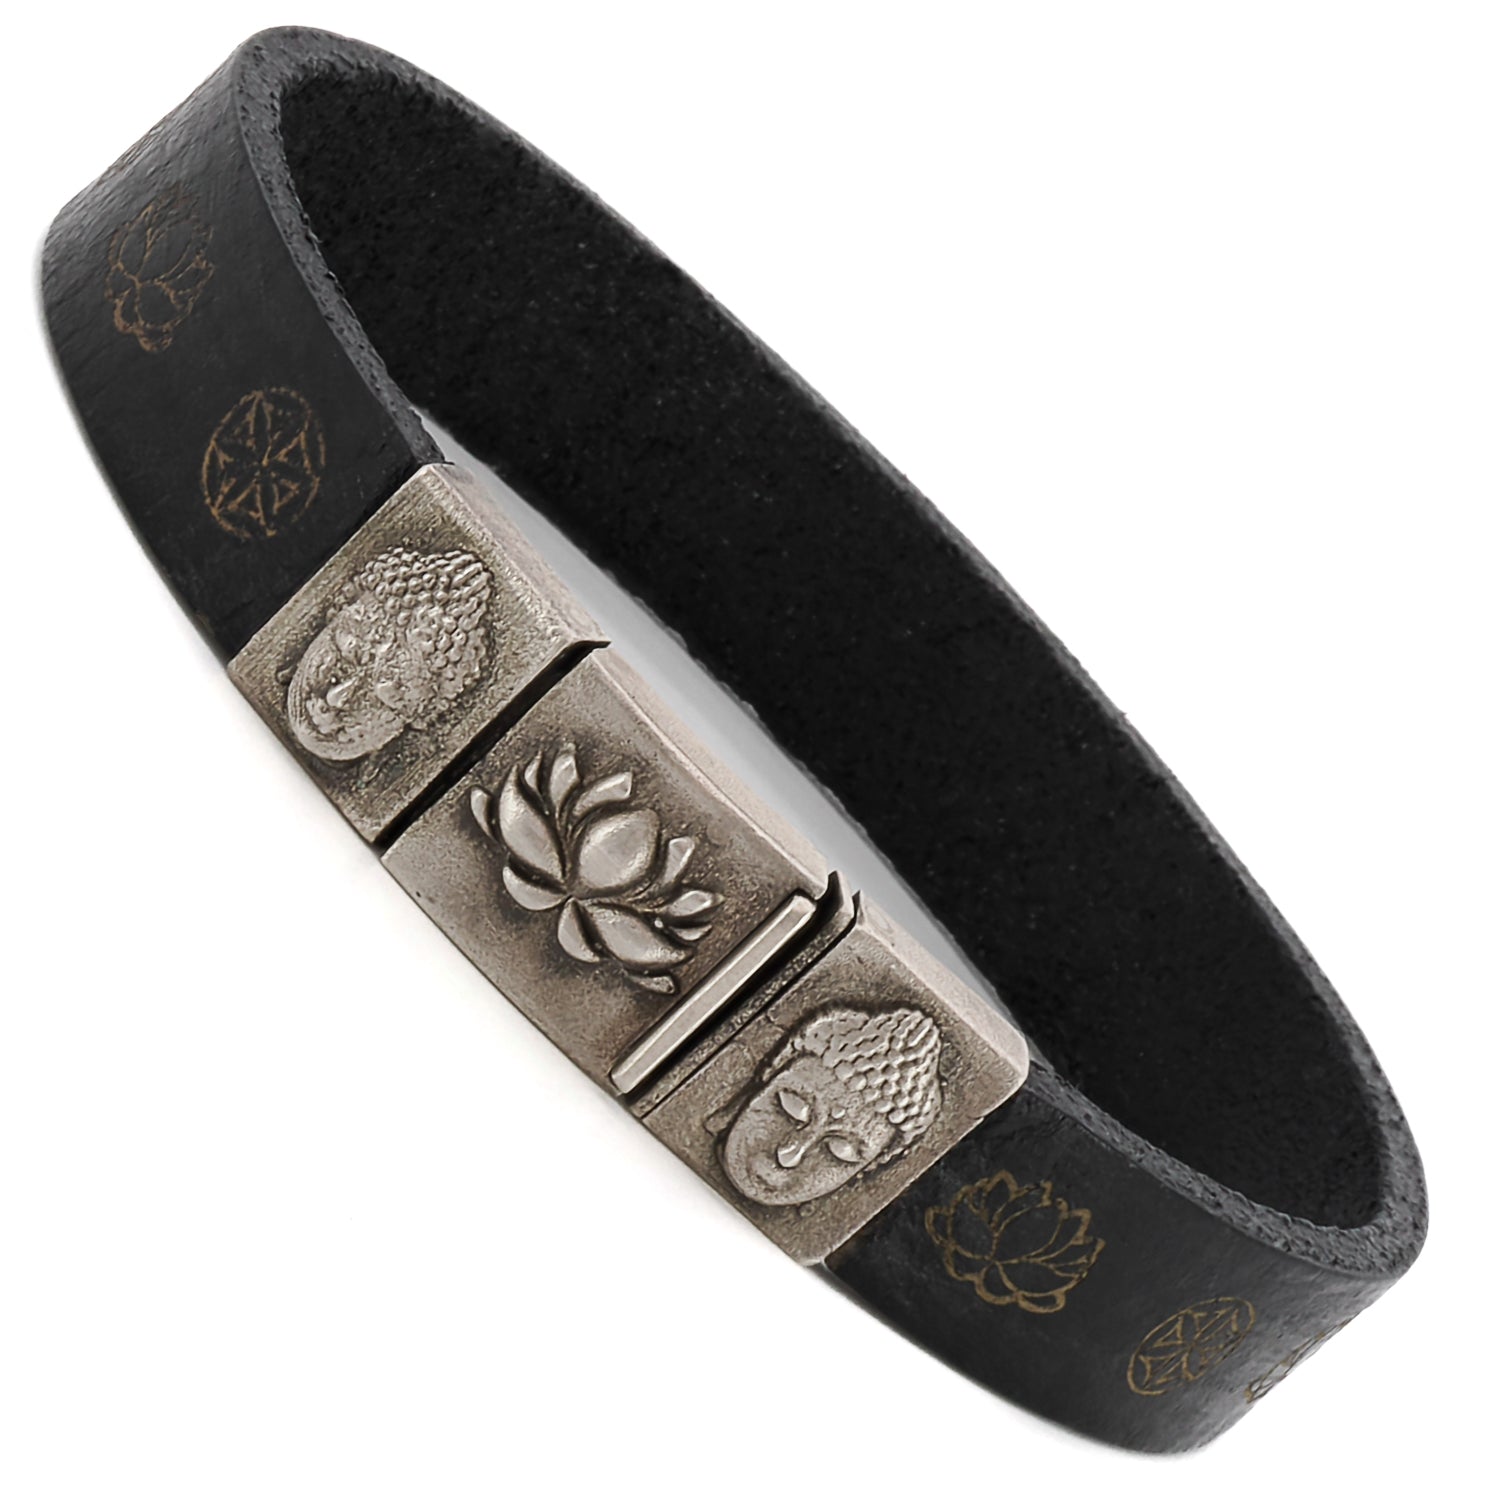 Laser-Engraved Leather - Spiritual Bracelet with Silver Buddha and Lotus Symbol.